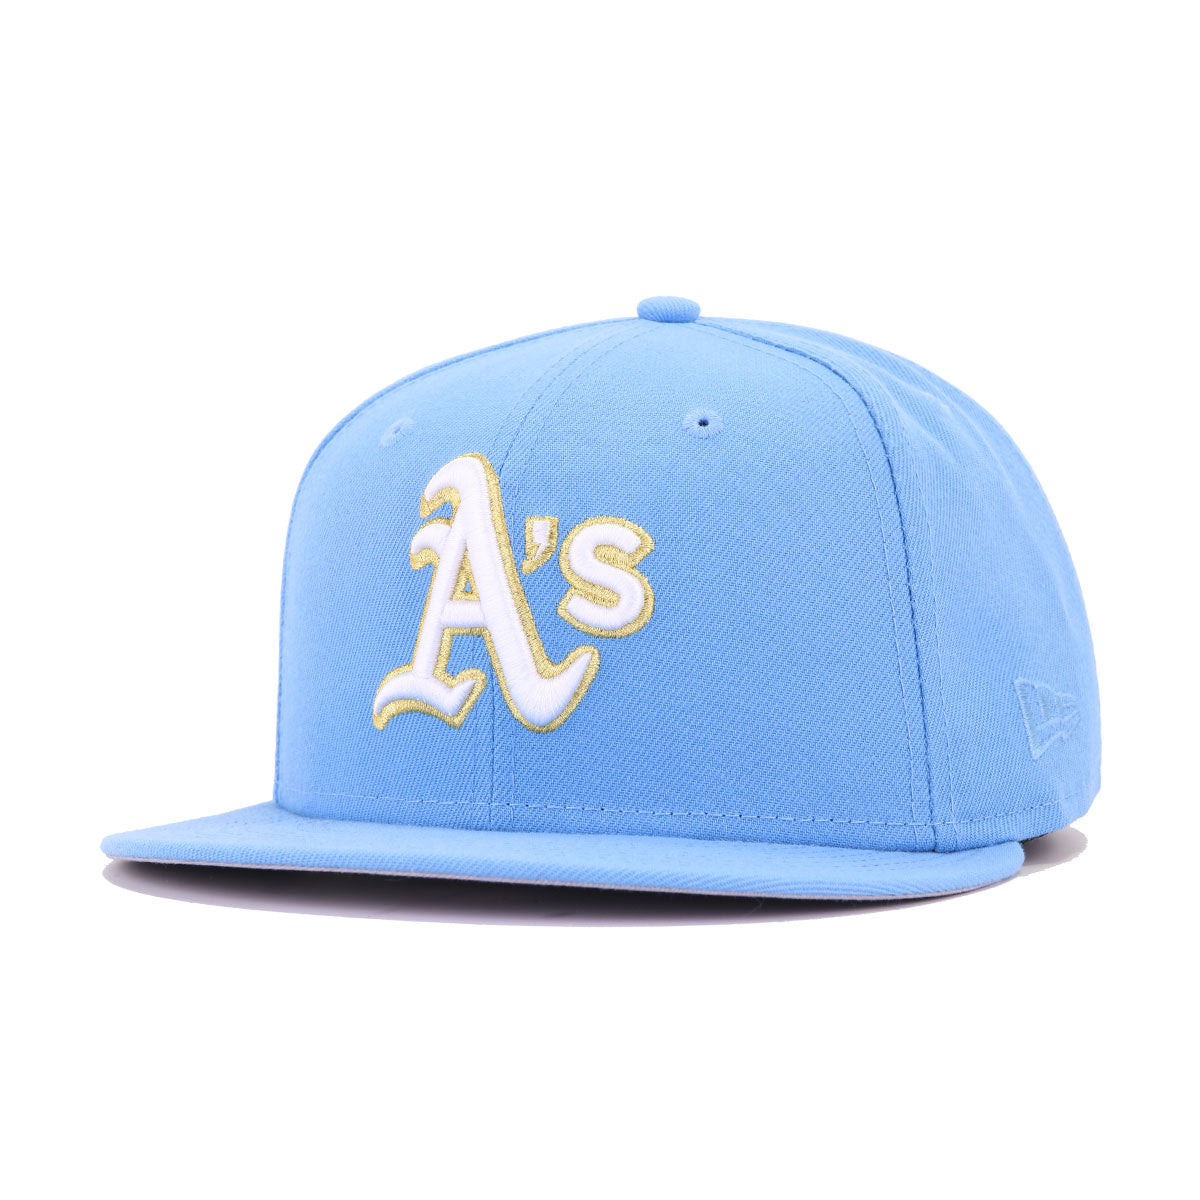 blue baseball fitted cap